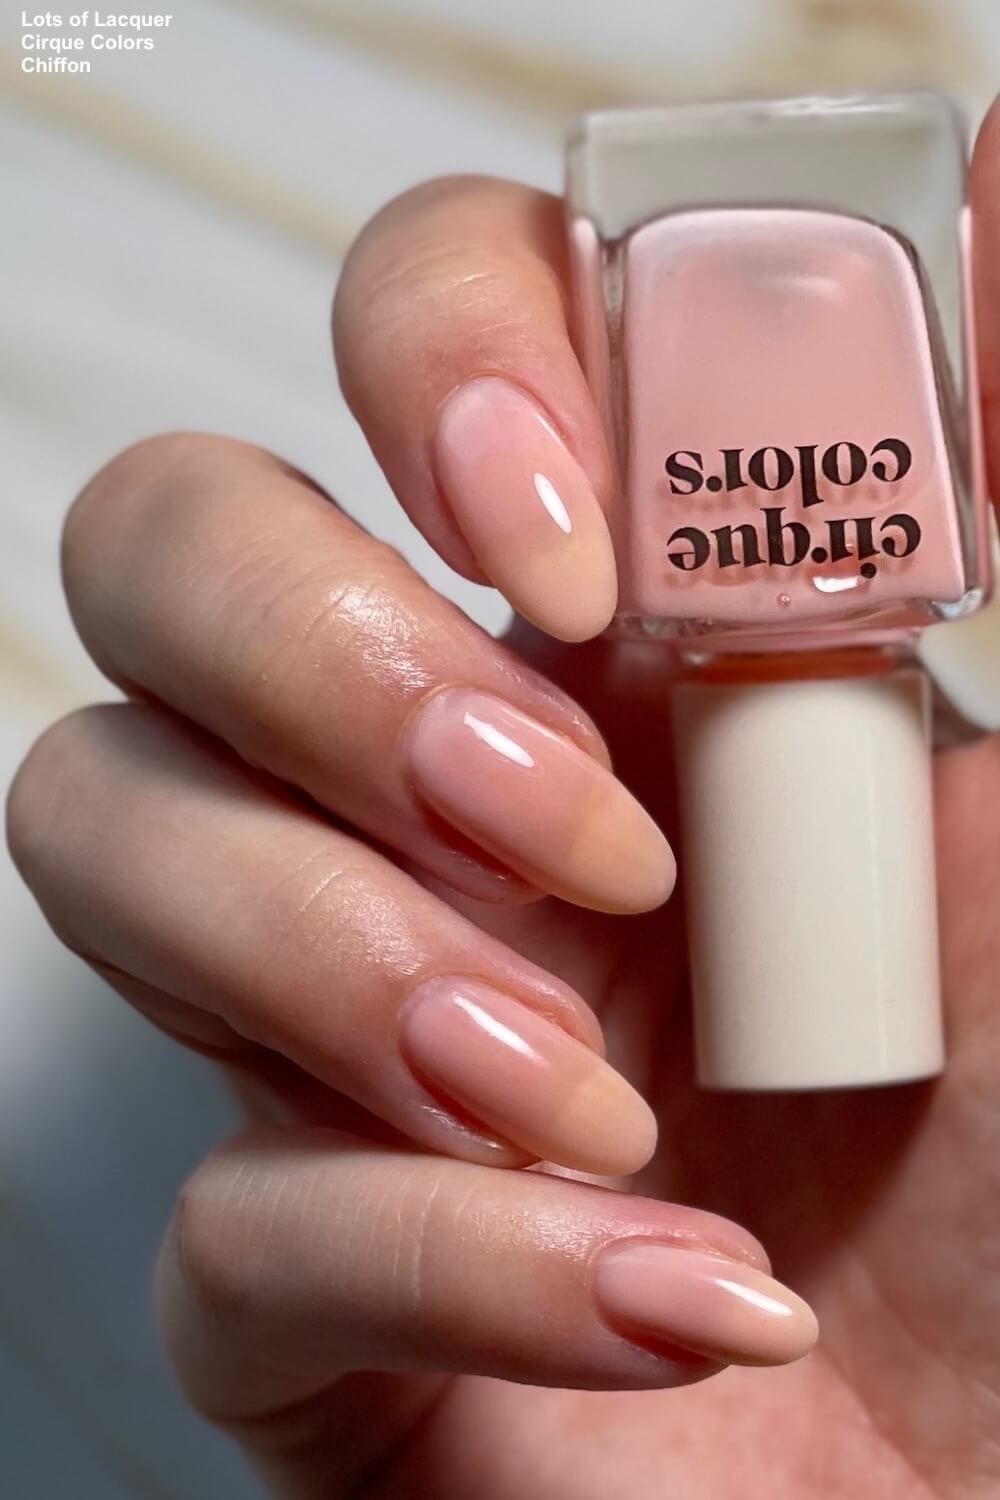 essie 'ballet slippers', a classic sheer pale pink nail polish | Pale nails,  Pale pink nails, Ballet slippers nail polish